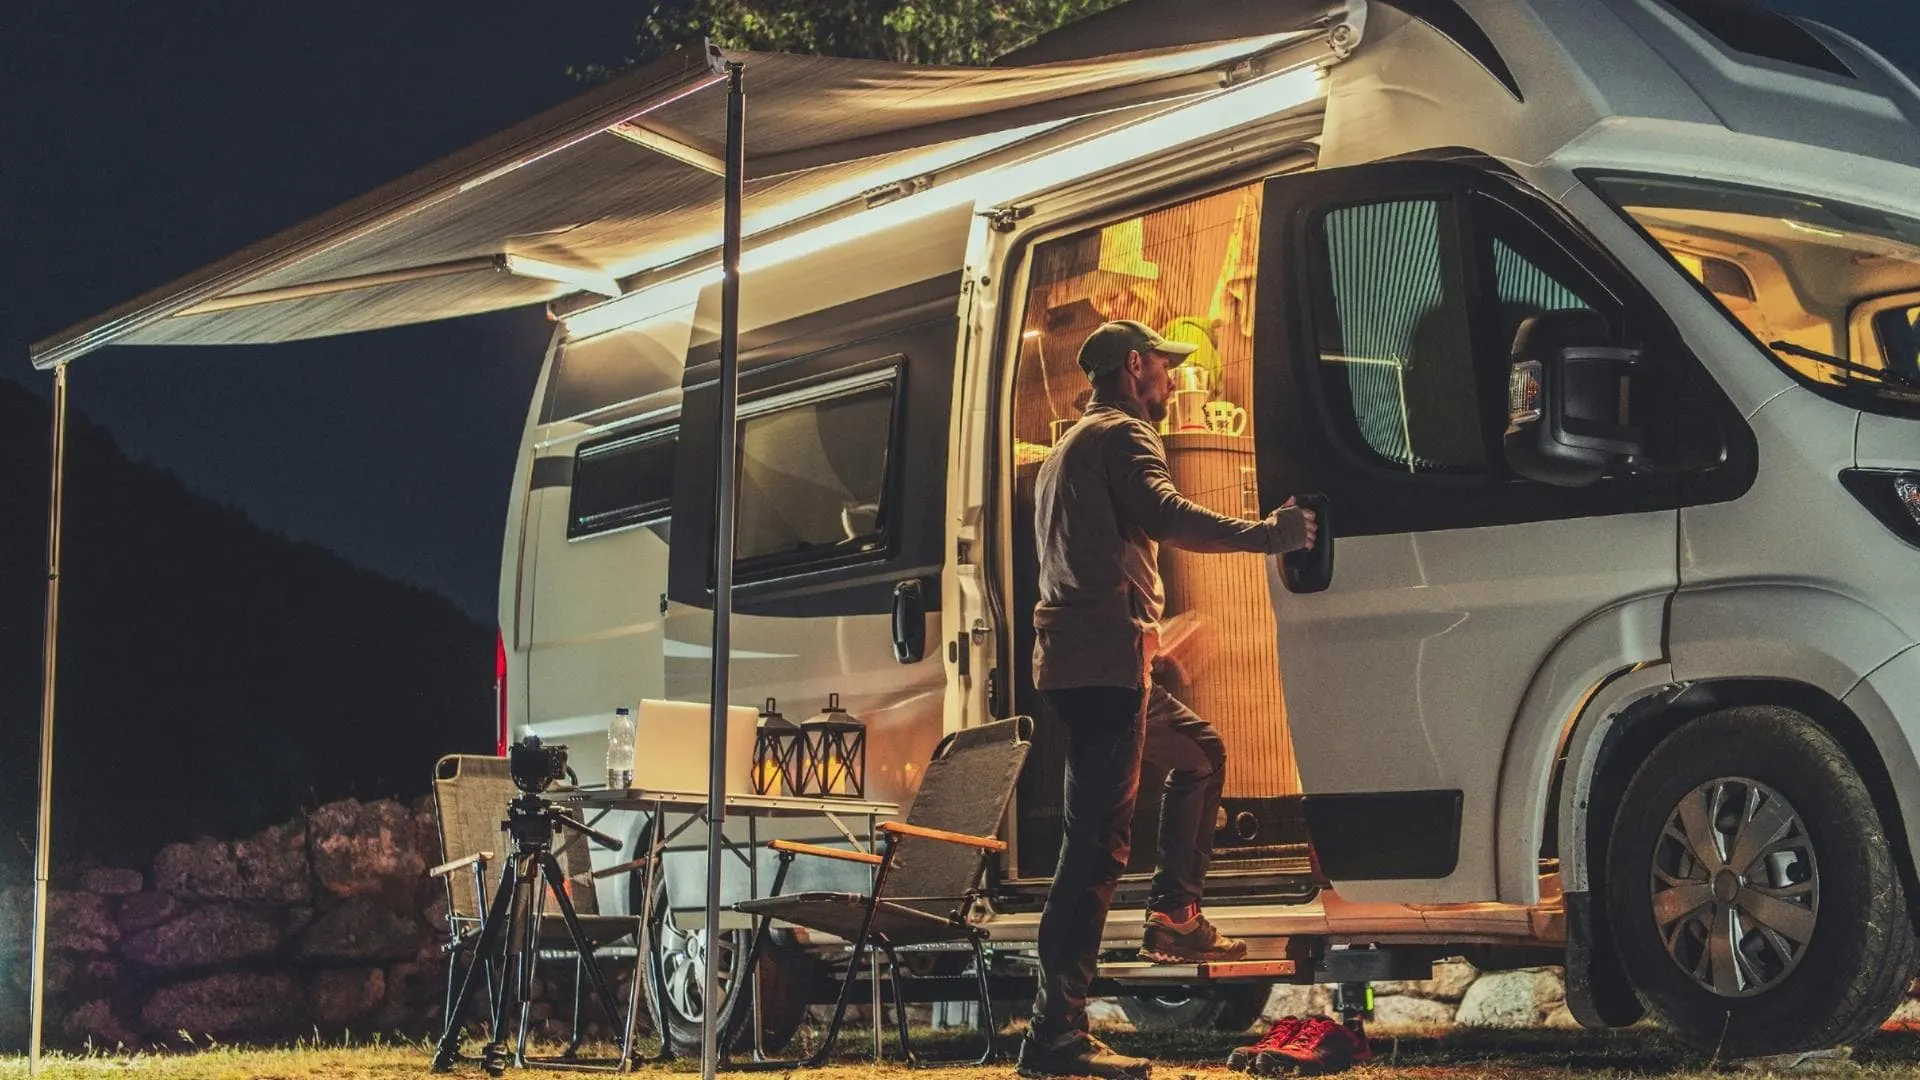 Camping on private property or "moochdocking" in RV slang terms